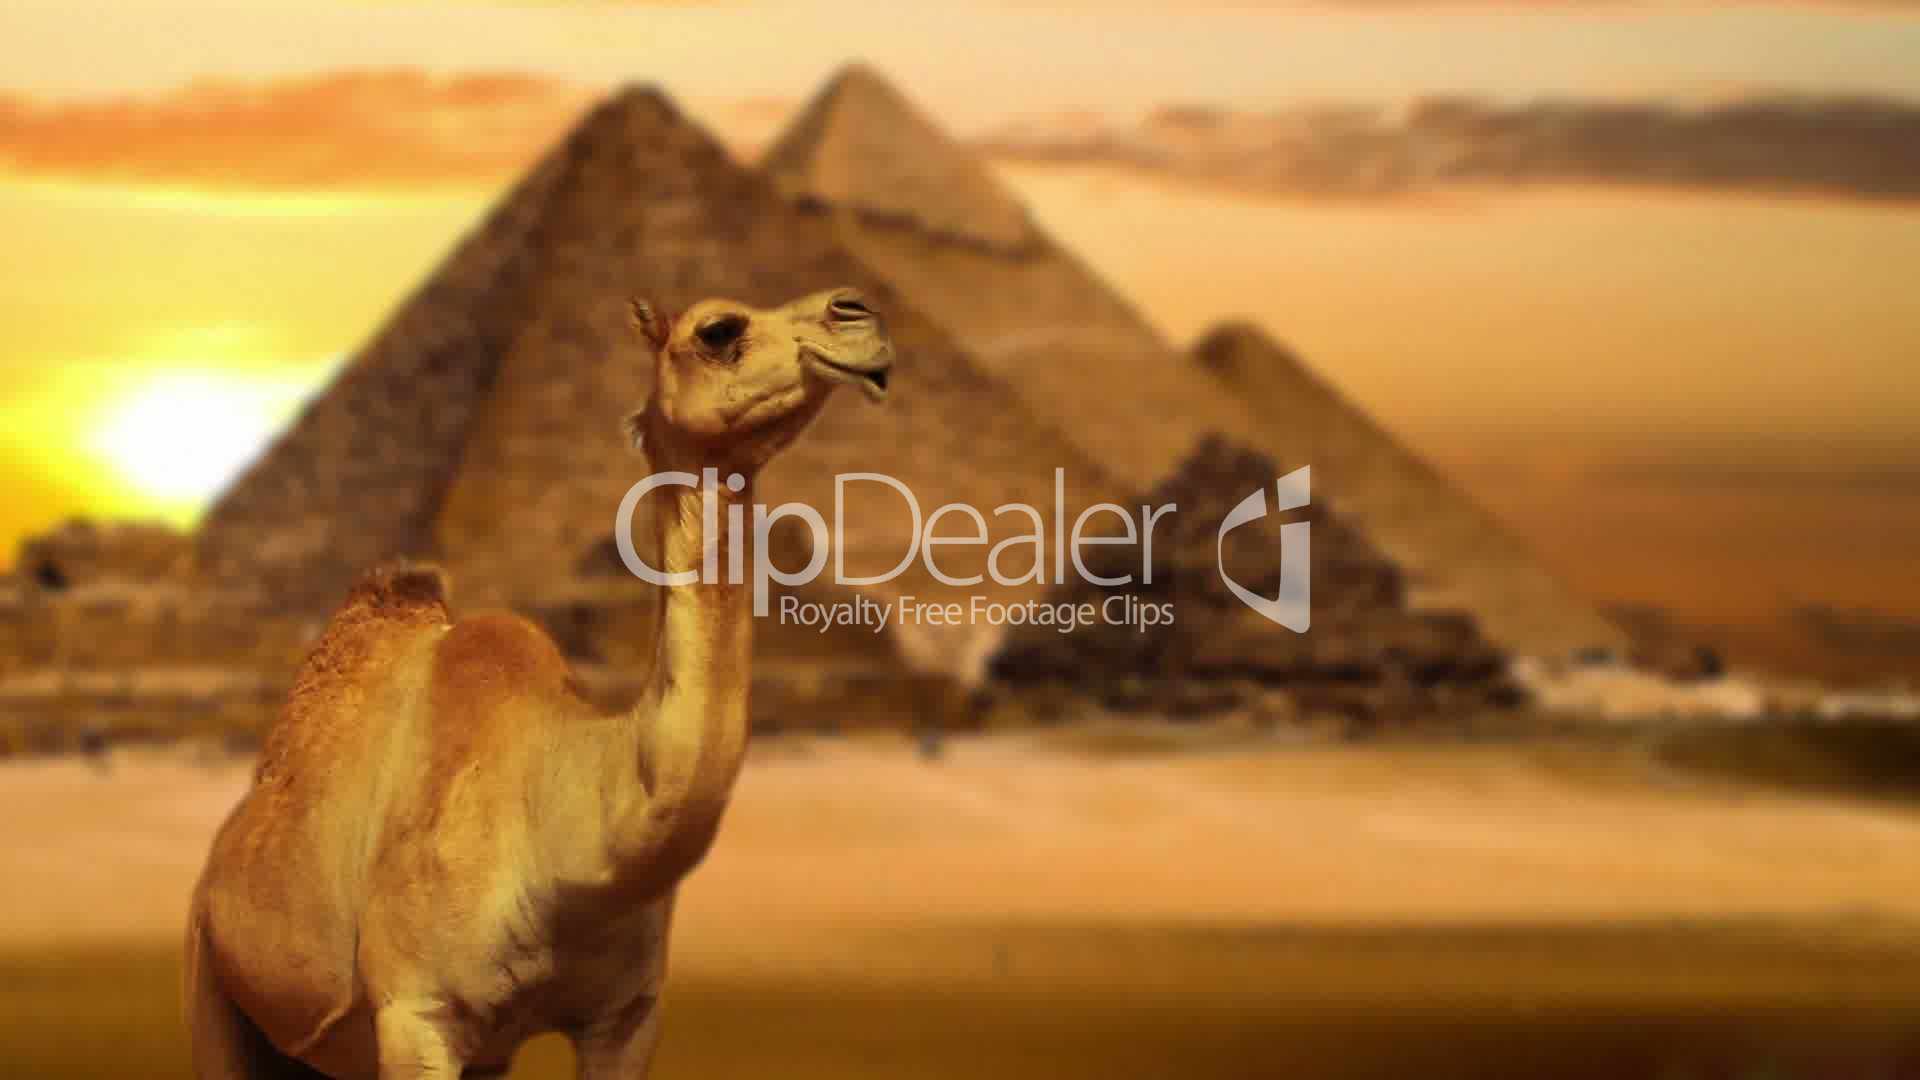 Camel in desert: Royalty-free video and stock footage